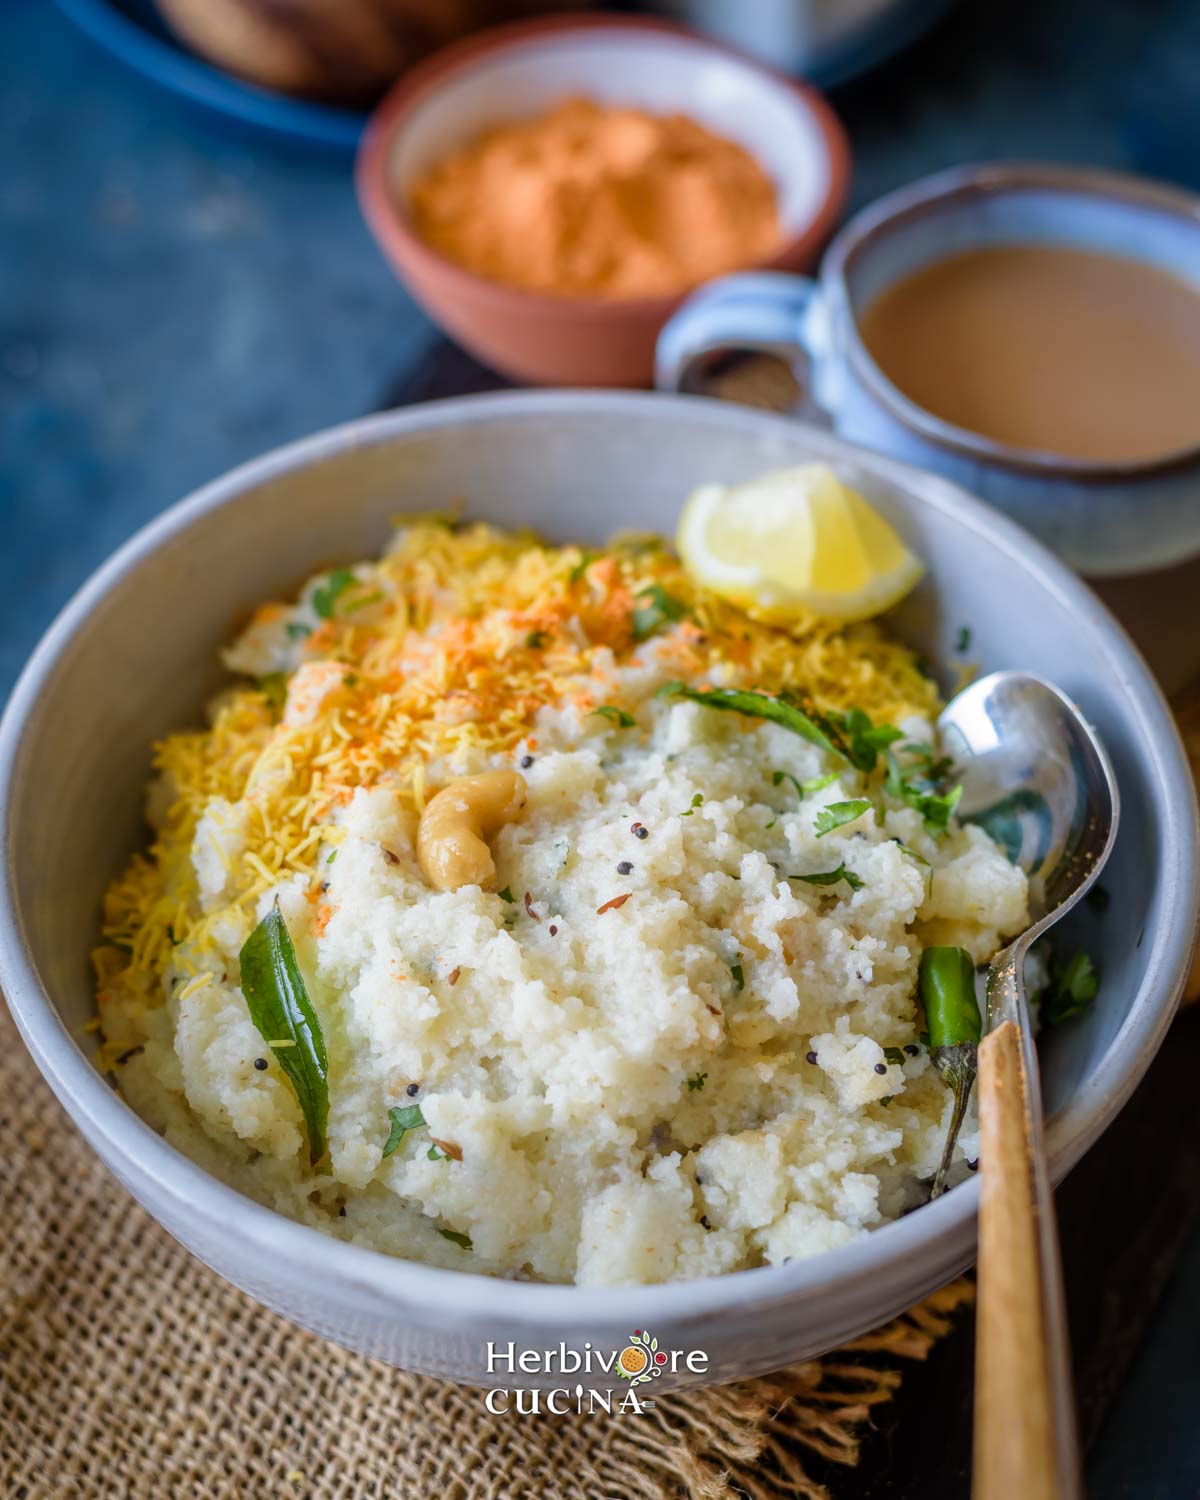 Side view of semolina upma with chutney and sev in a gray bowl with masala chai and chutney in the background.